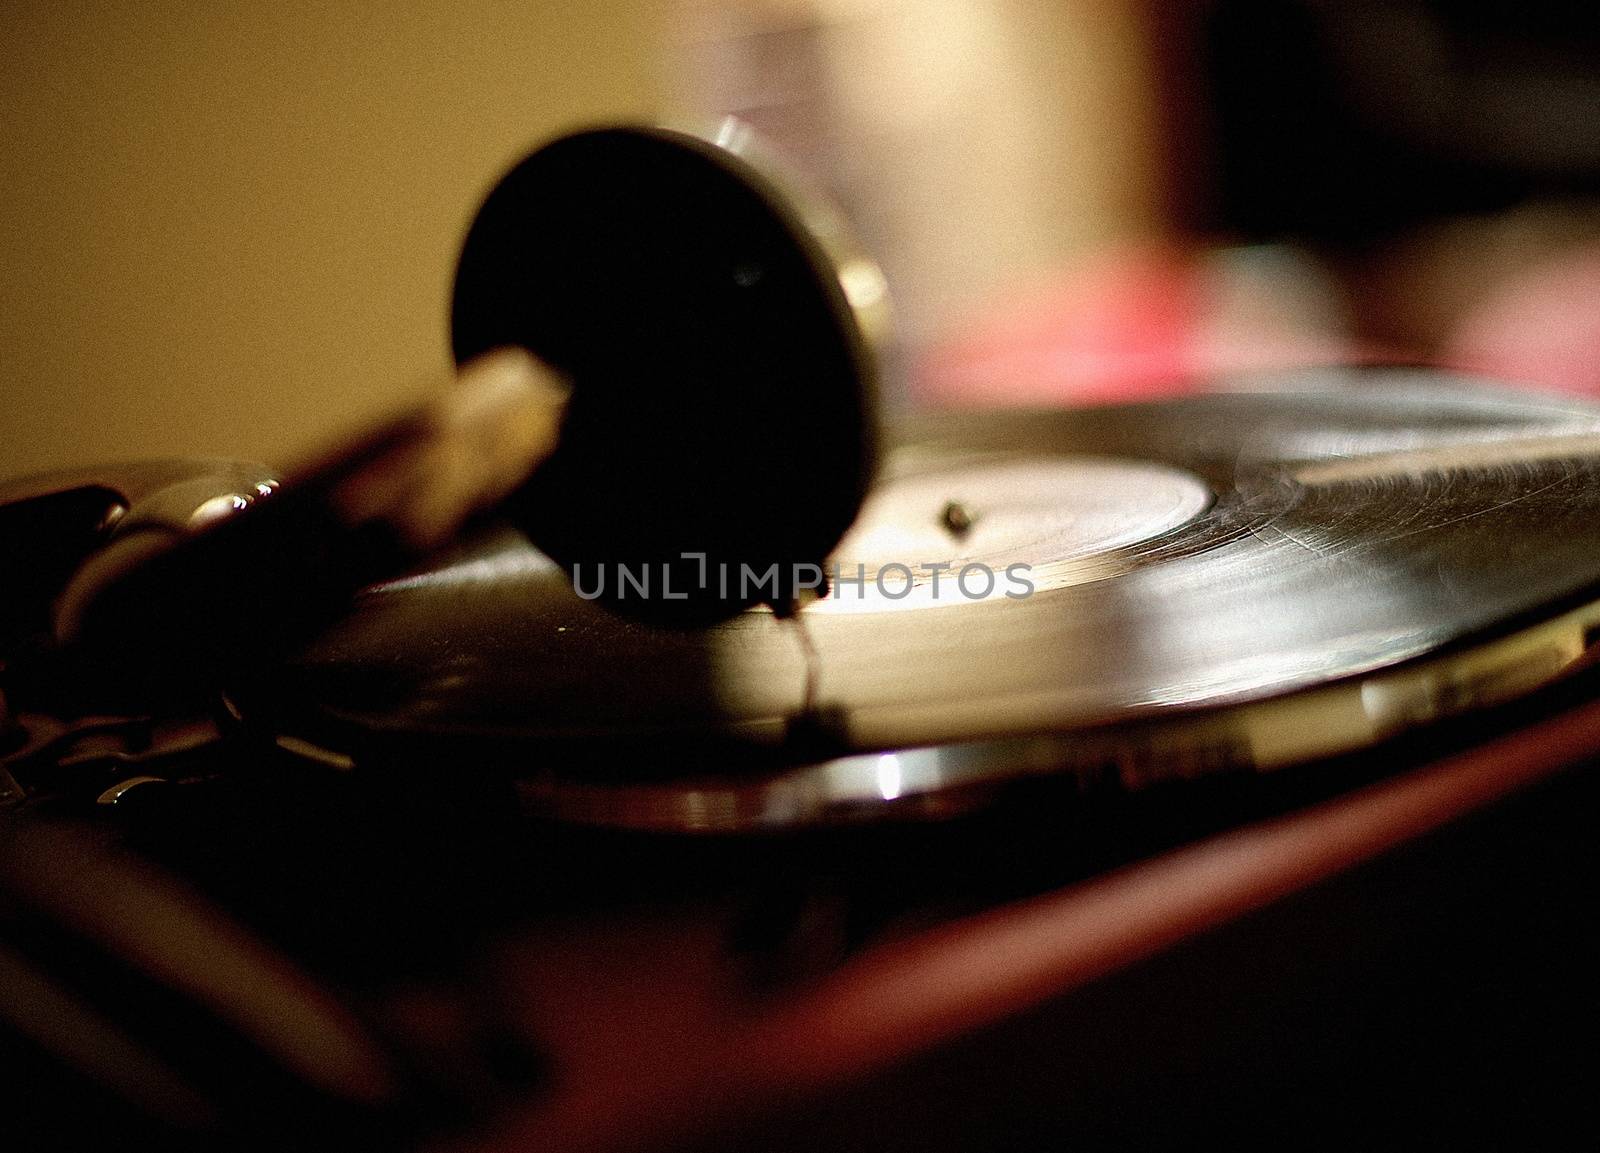 Horizontal shot of the vintage vinyl record player playing scratched LP.